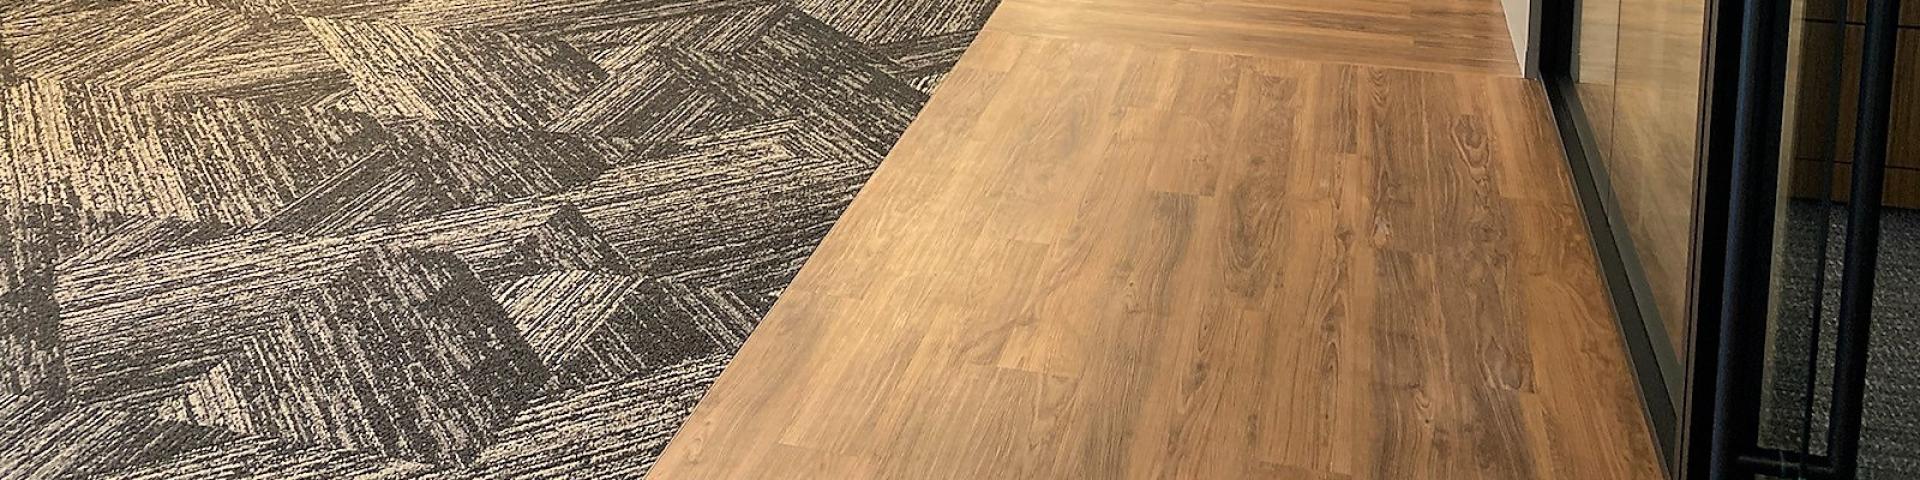 Occupied Office Carpet Replacement